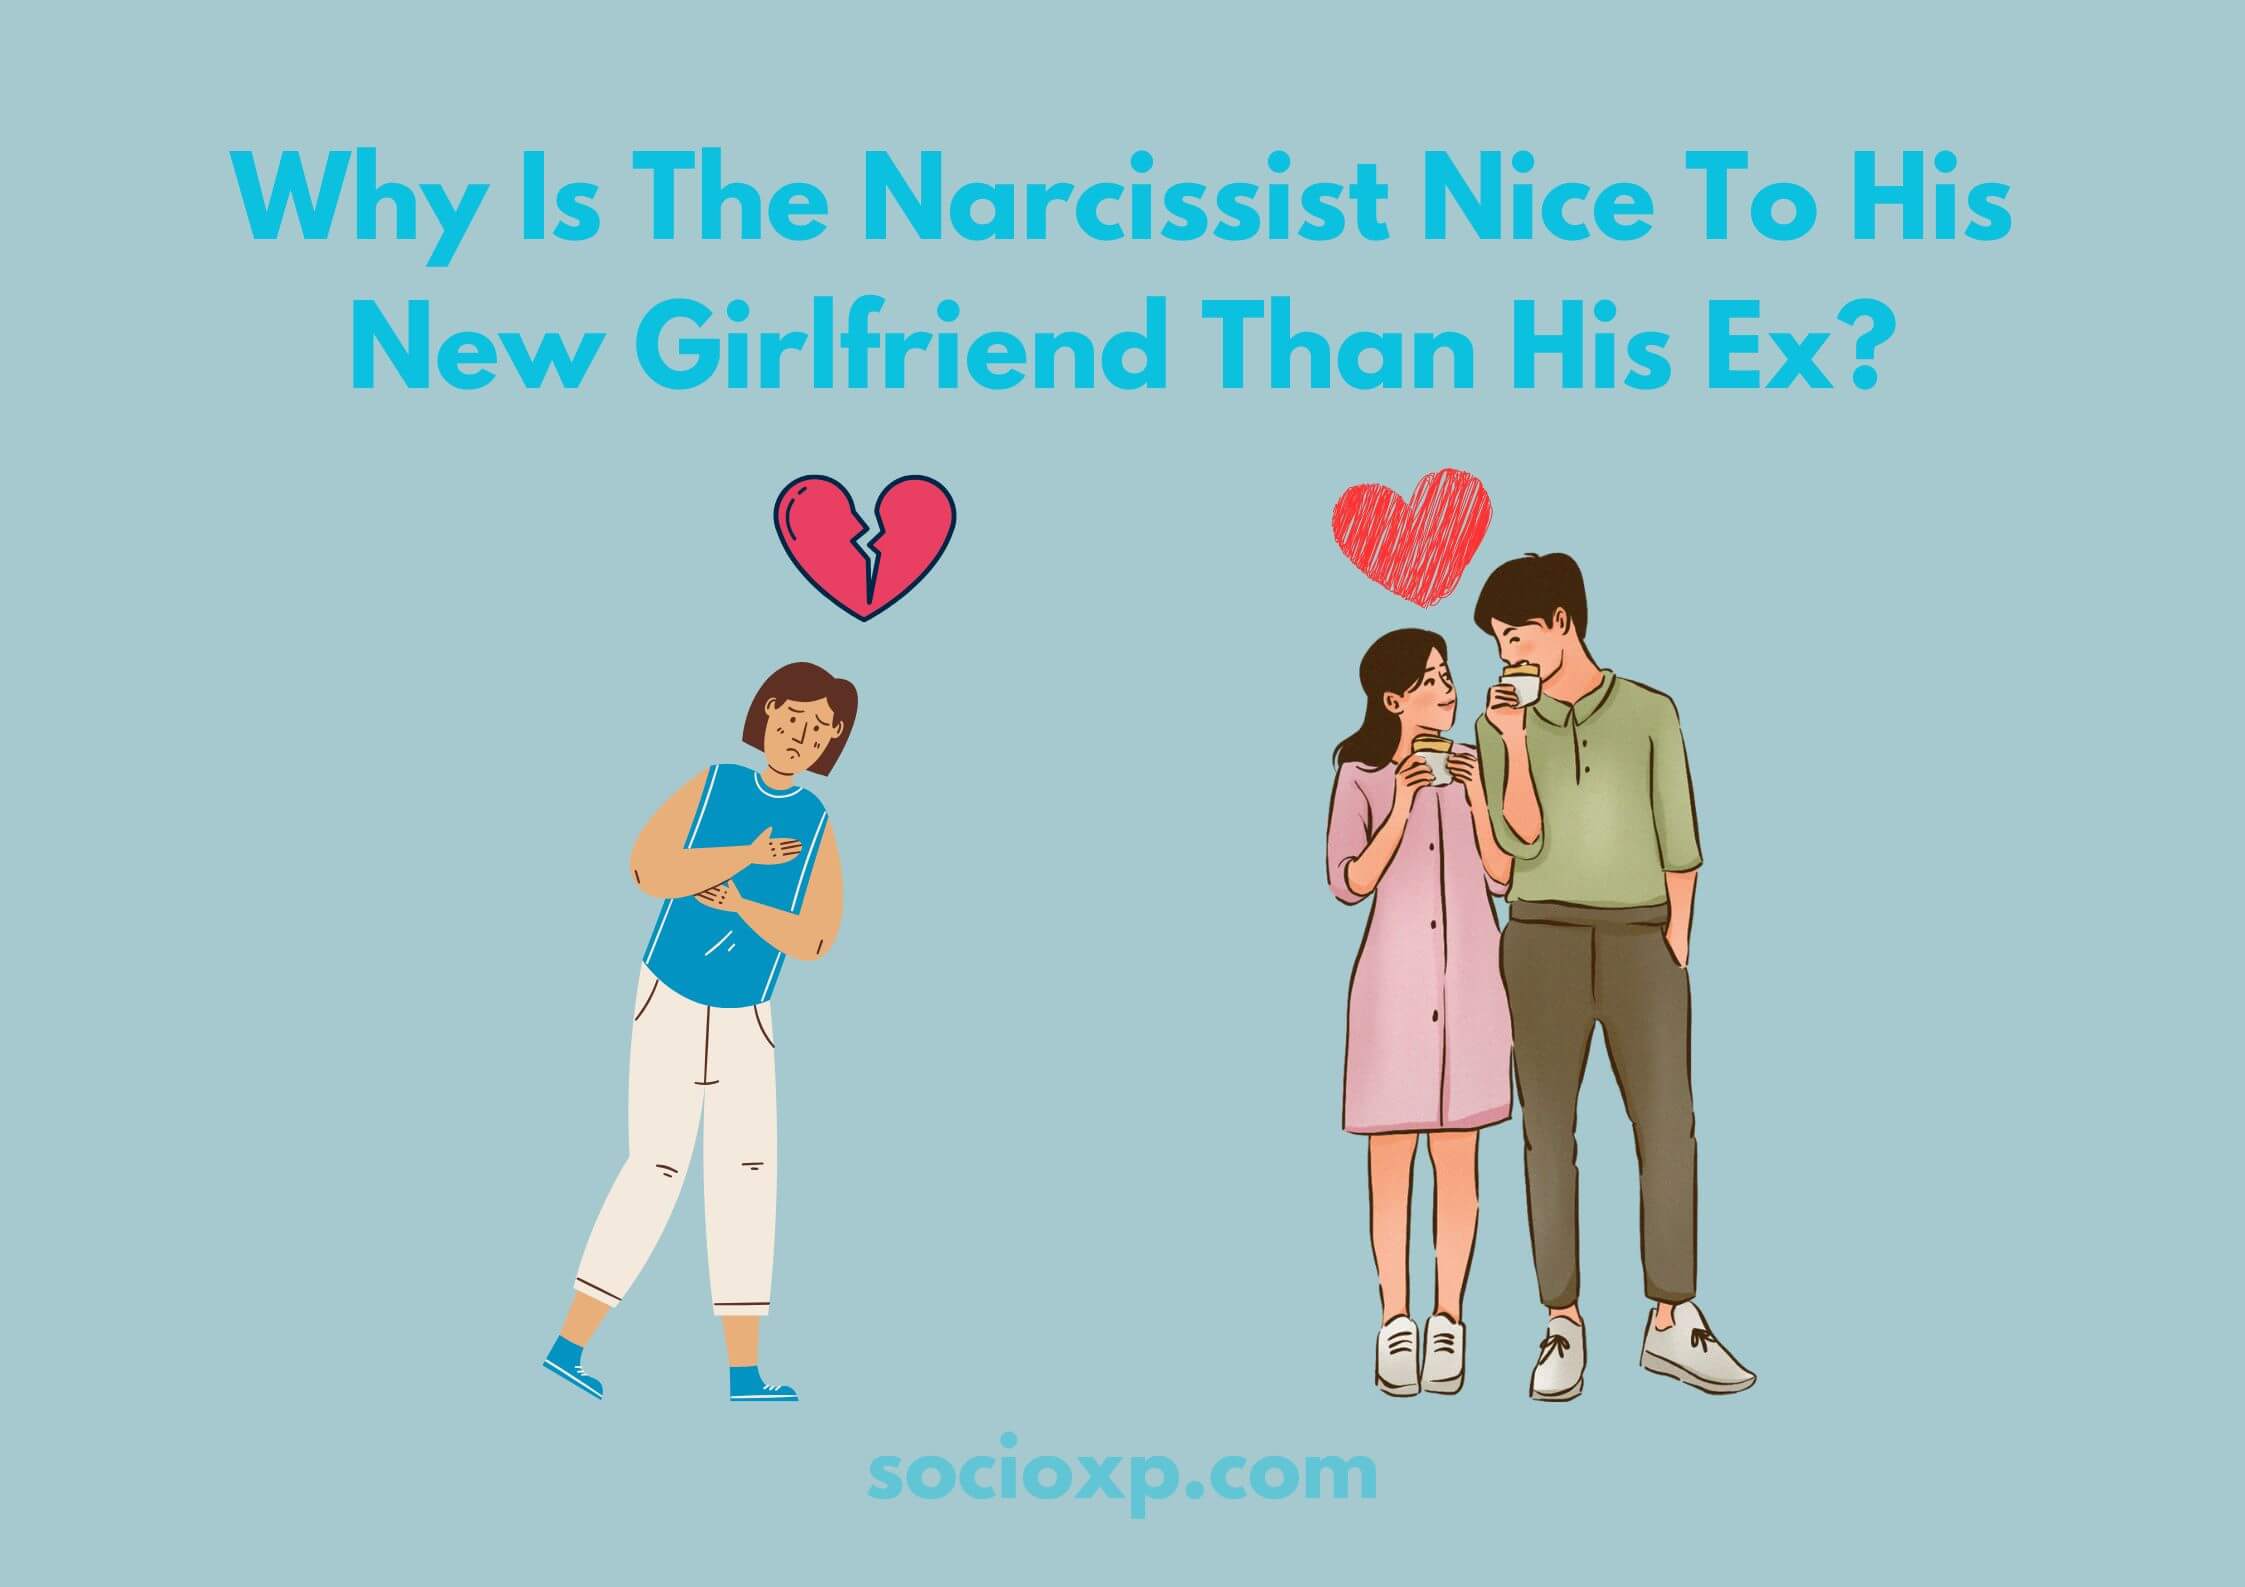 Why Is The Narcissist Nice To His New Girlfriend Than His Ex?